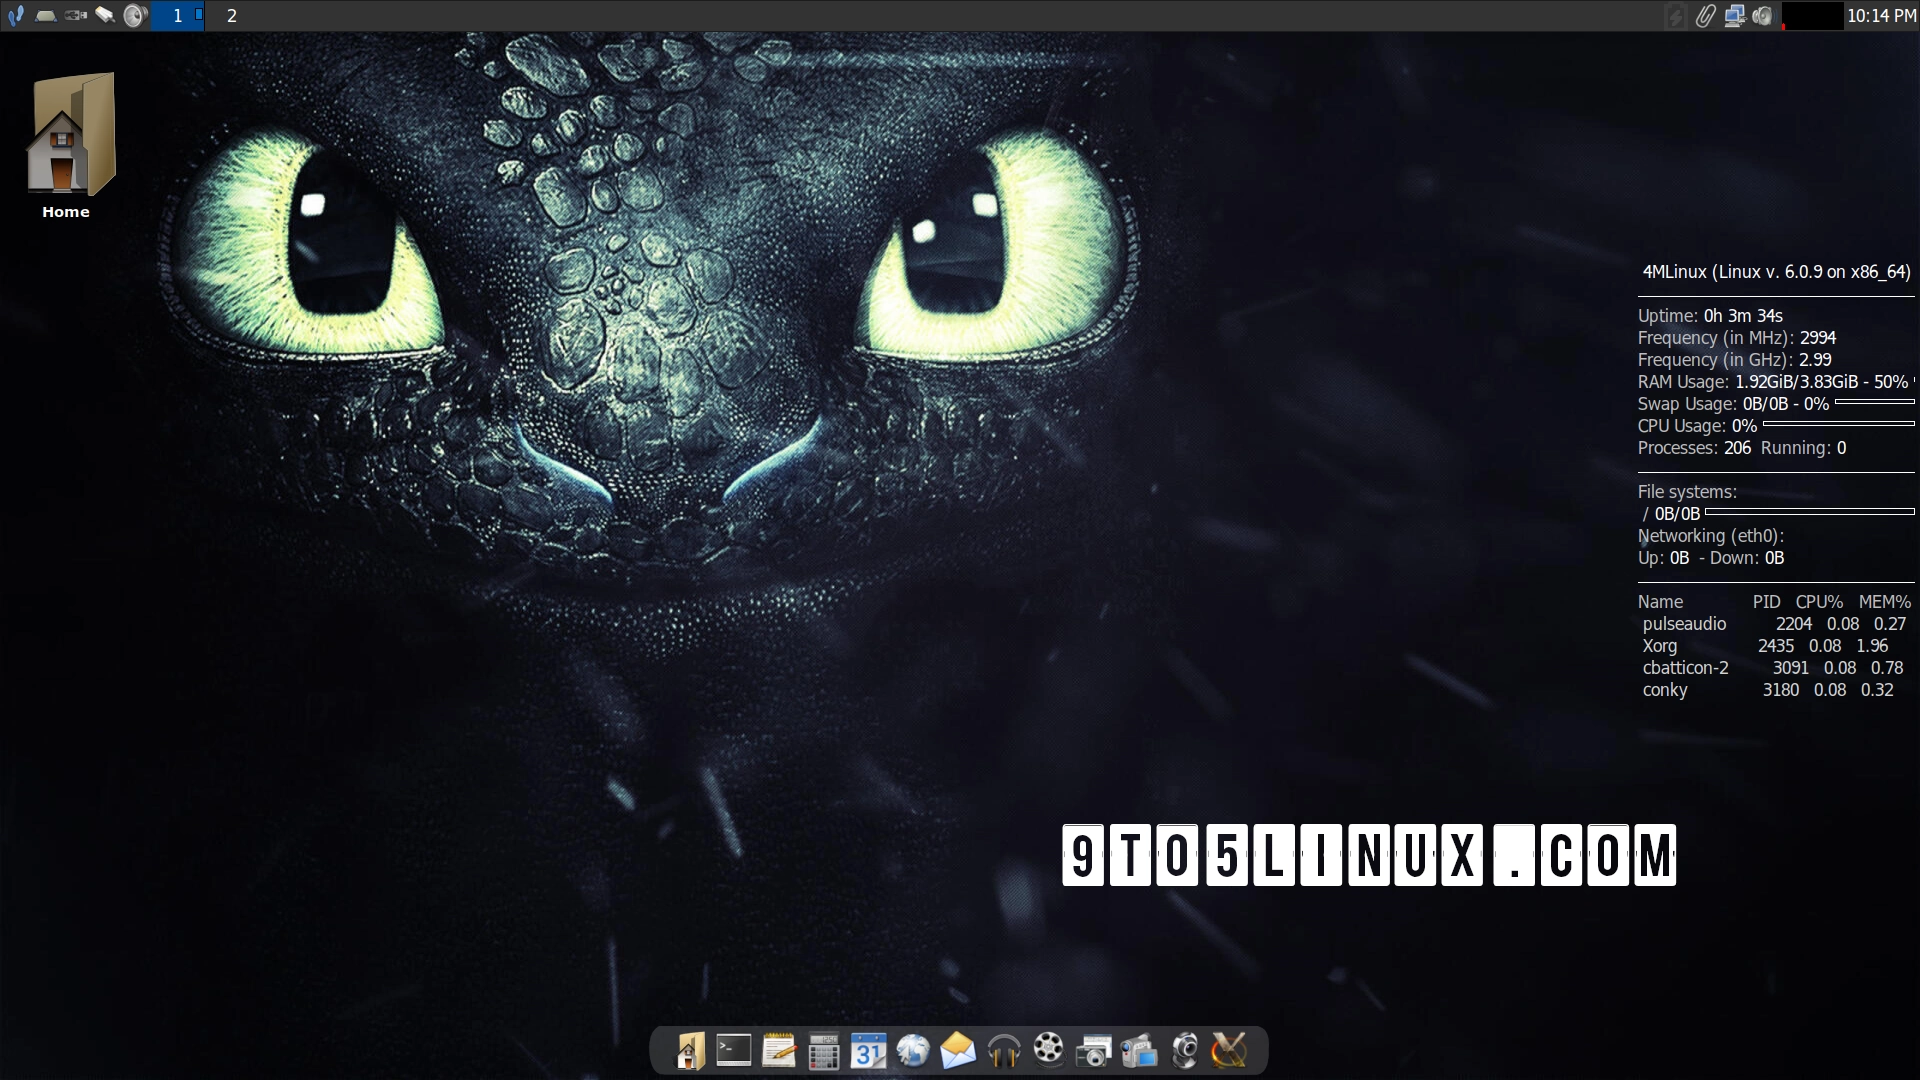 Lightweight Distro 4MLinux 41 Arrives with Linux Kernel 6.0, Btrfs Support, and New Apps